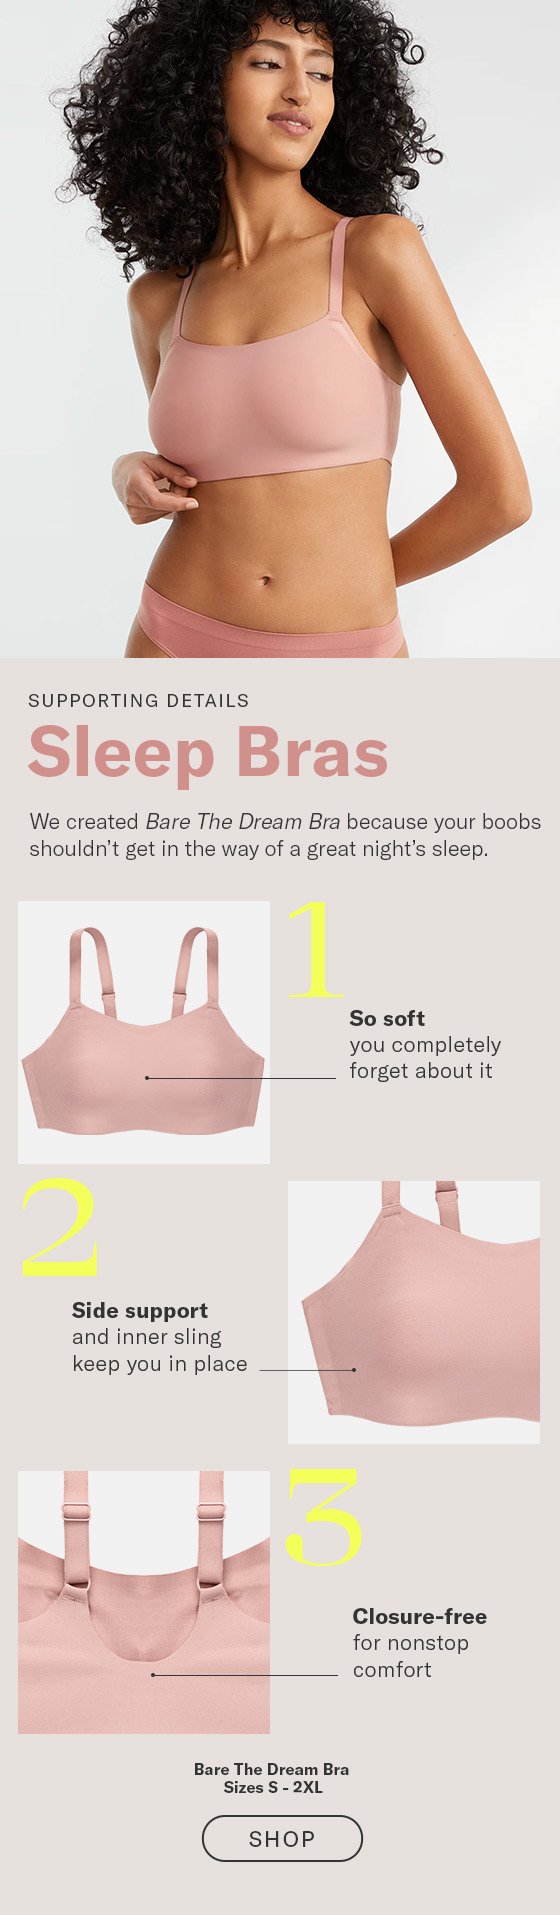 Get Your Perfect Fit For Less With 35% Off Glamorise Bras! - Bare  Necessities